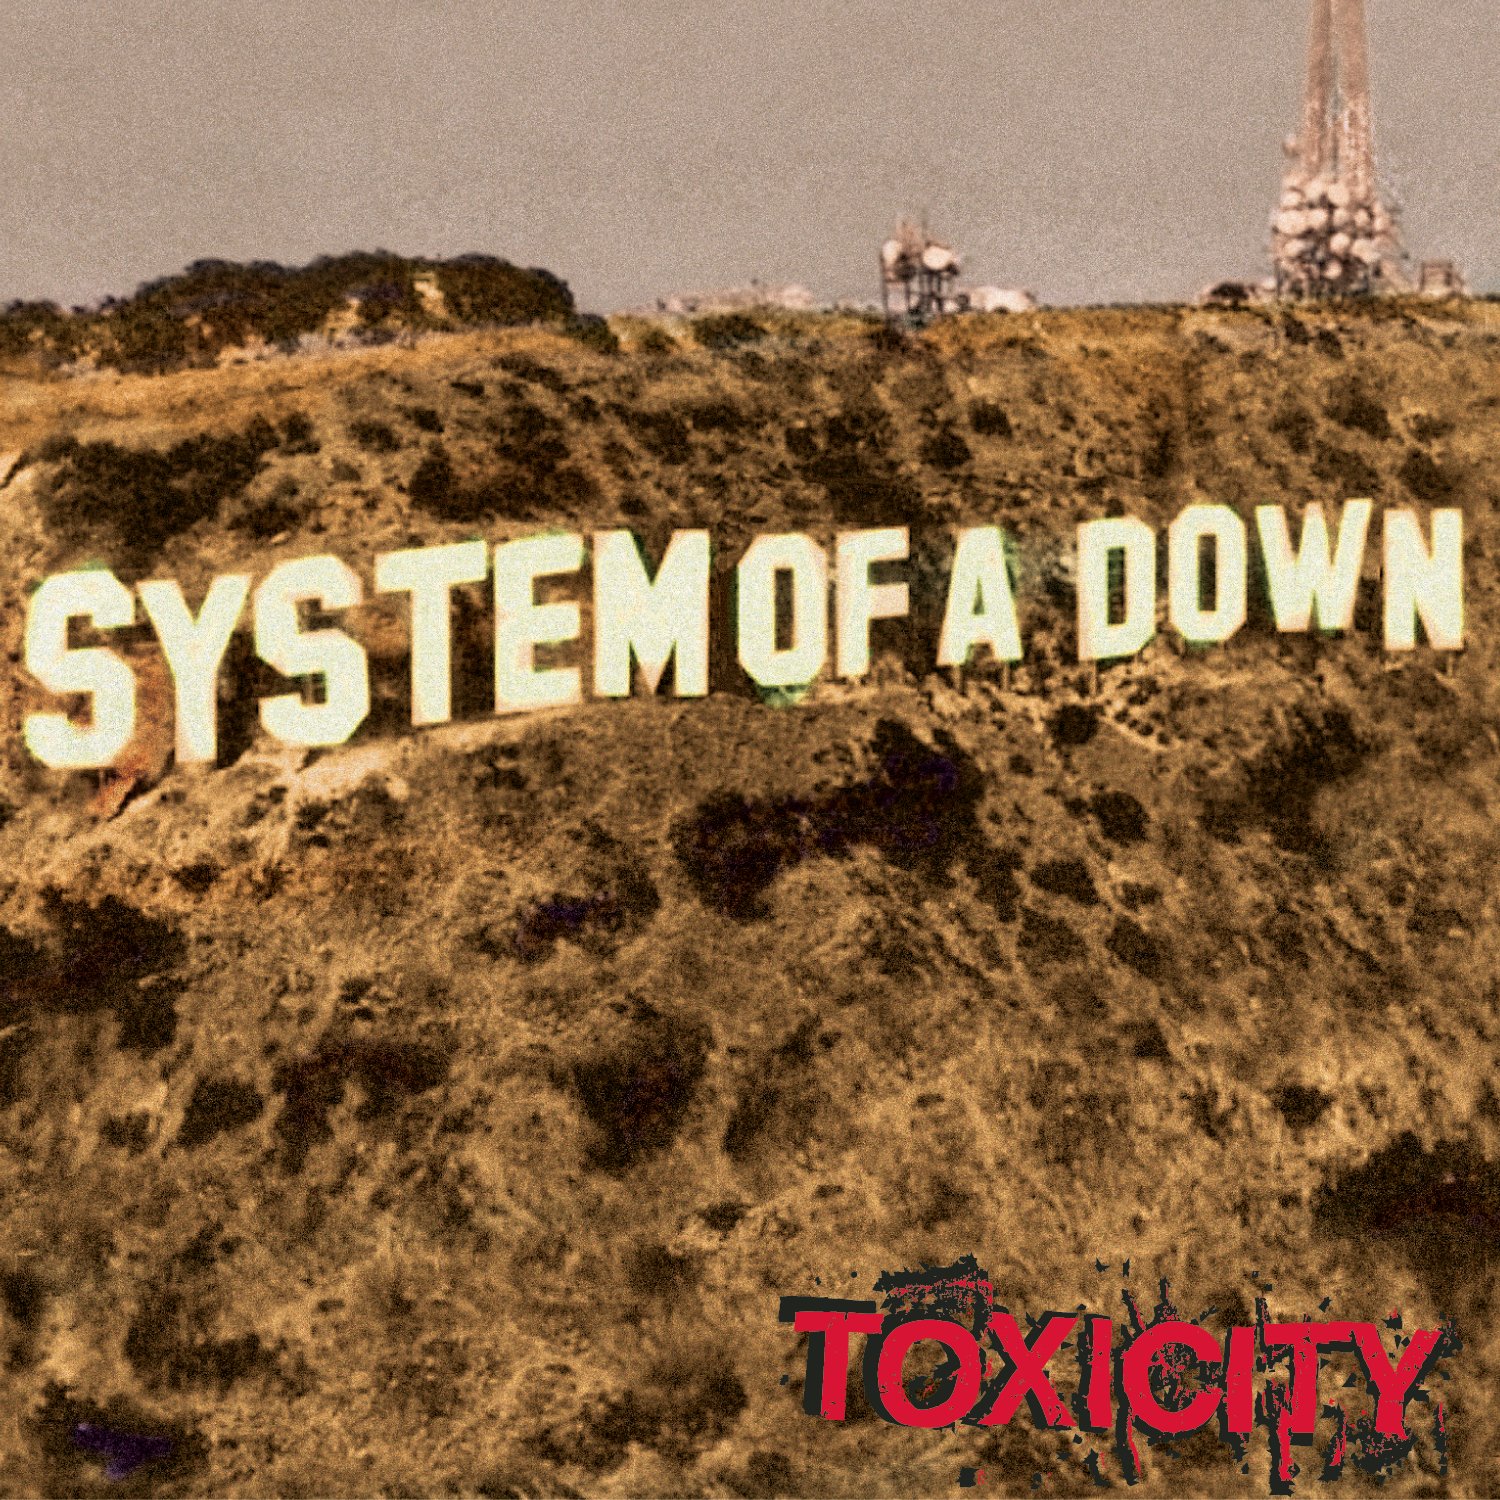 System of a down - Toxicity (Art)